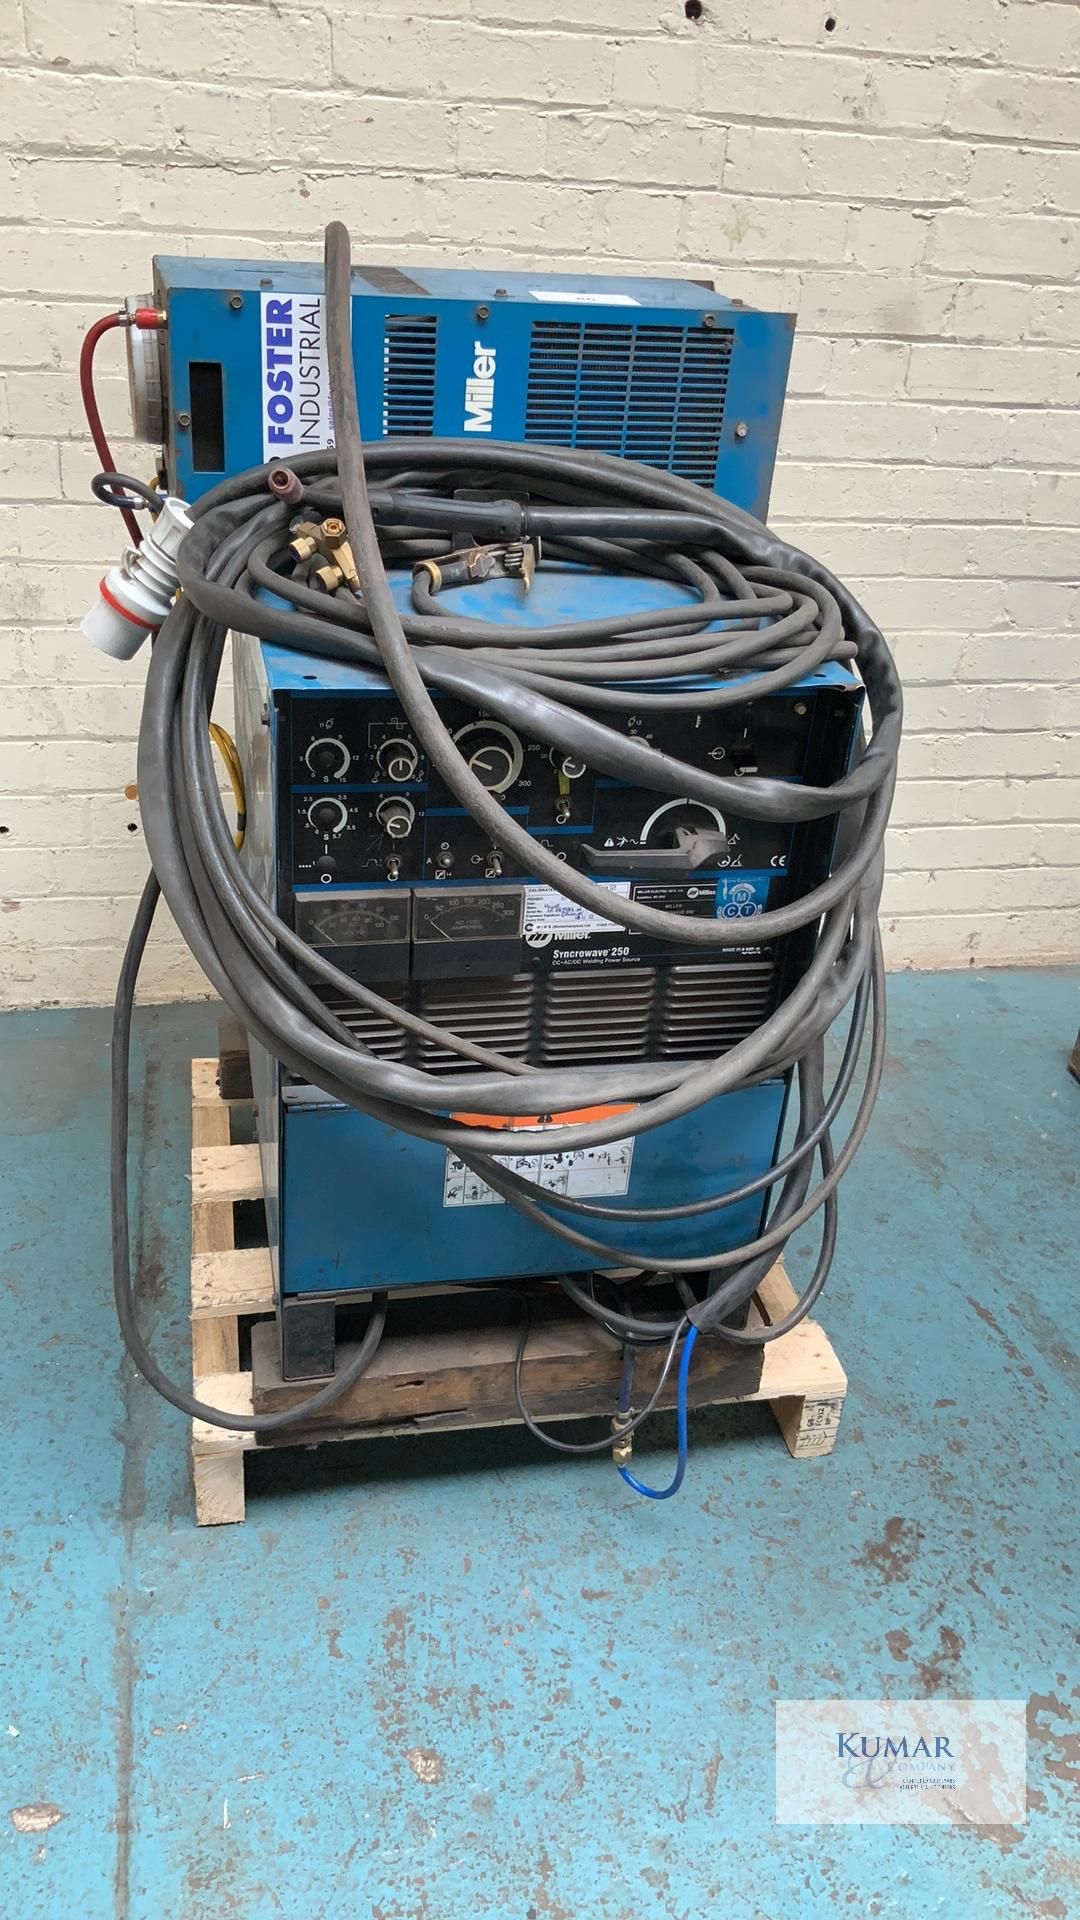 Miller Syncowave 250 CC.AC/DC Welding Power Source, Serial No.LA087984 with Miller Hydramate 1